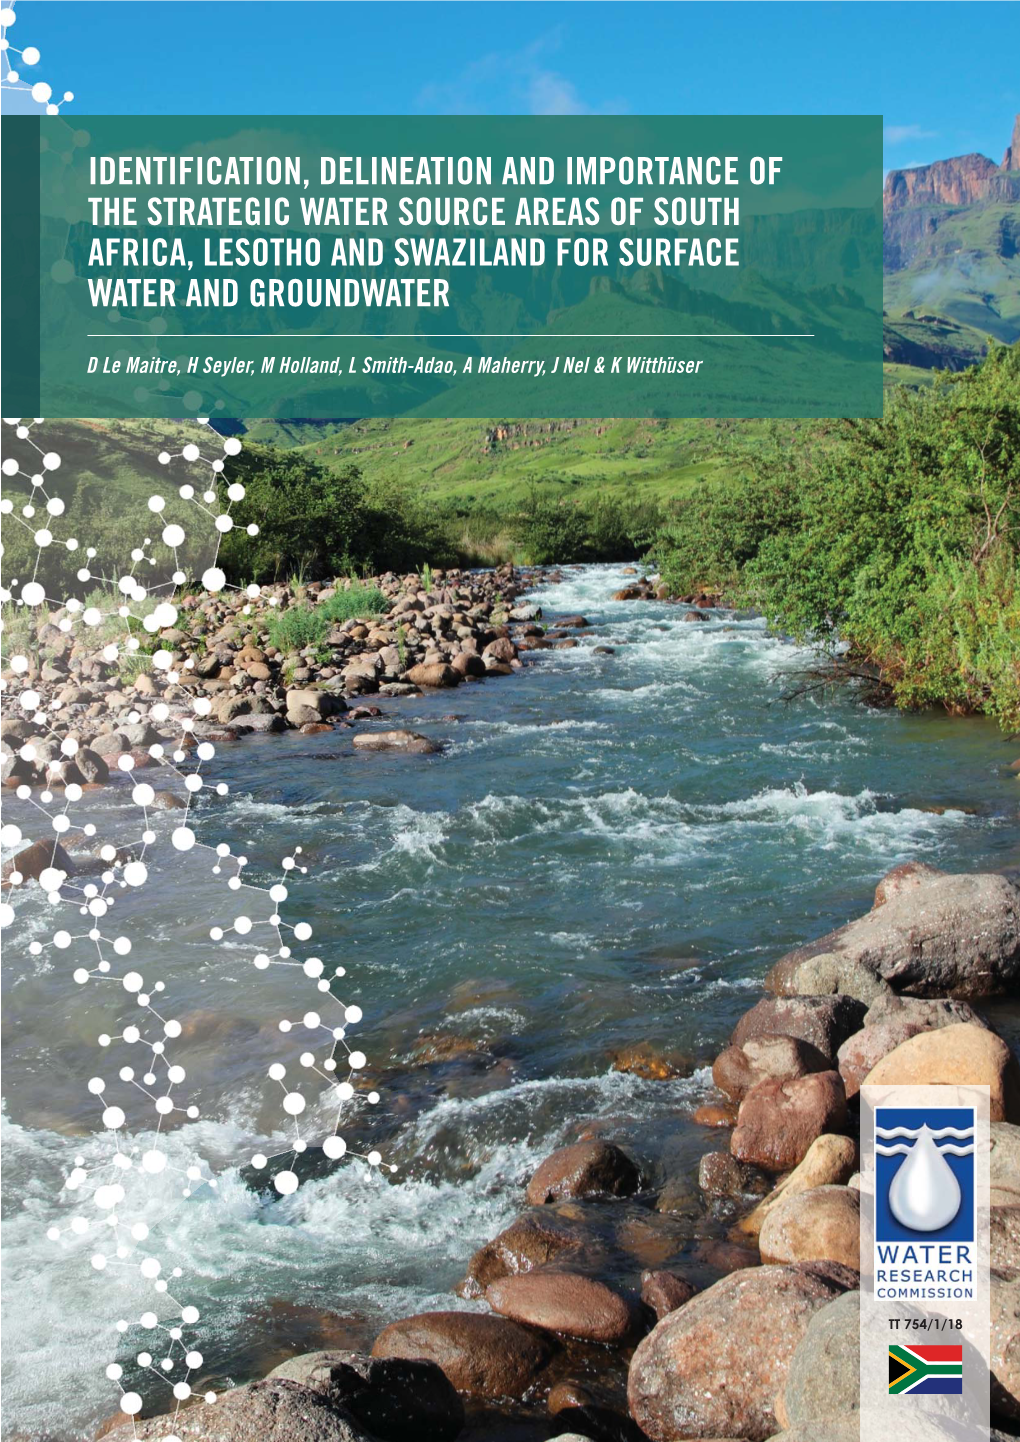 Identification, Delineation and Importance of the Strategic Water Source Areas of South Africa, Lesotho and Swaziland for Surface Water and Groundwater